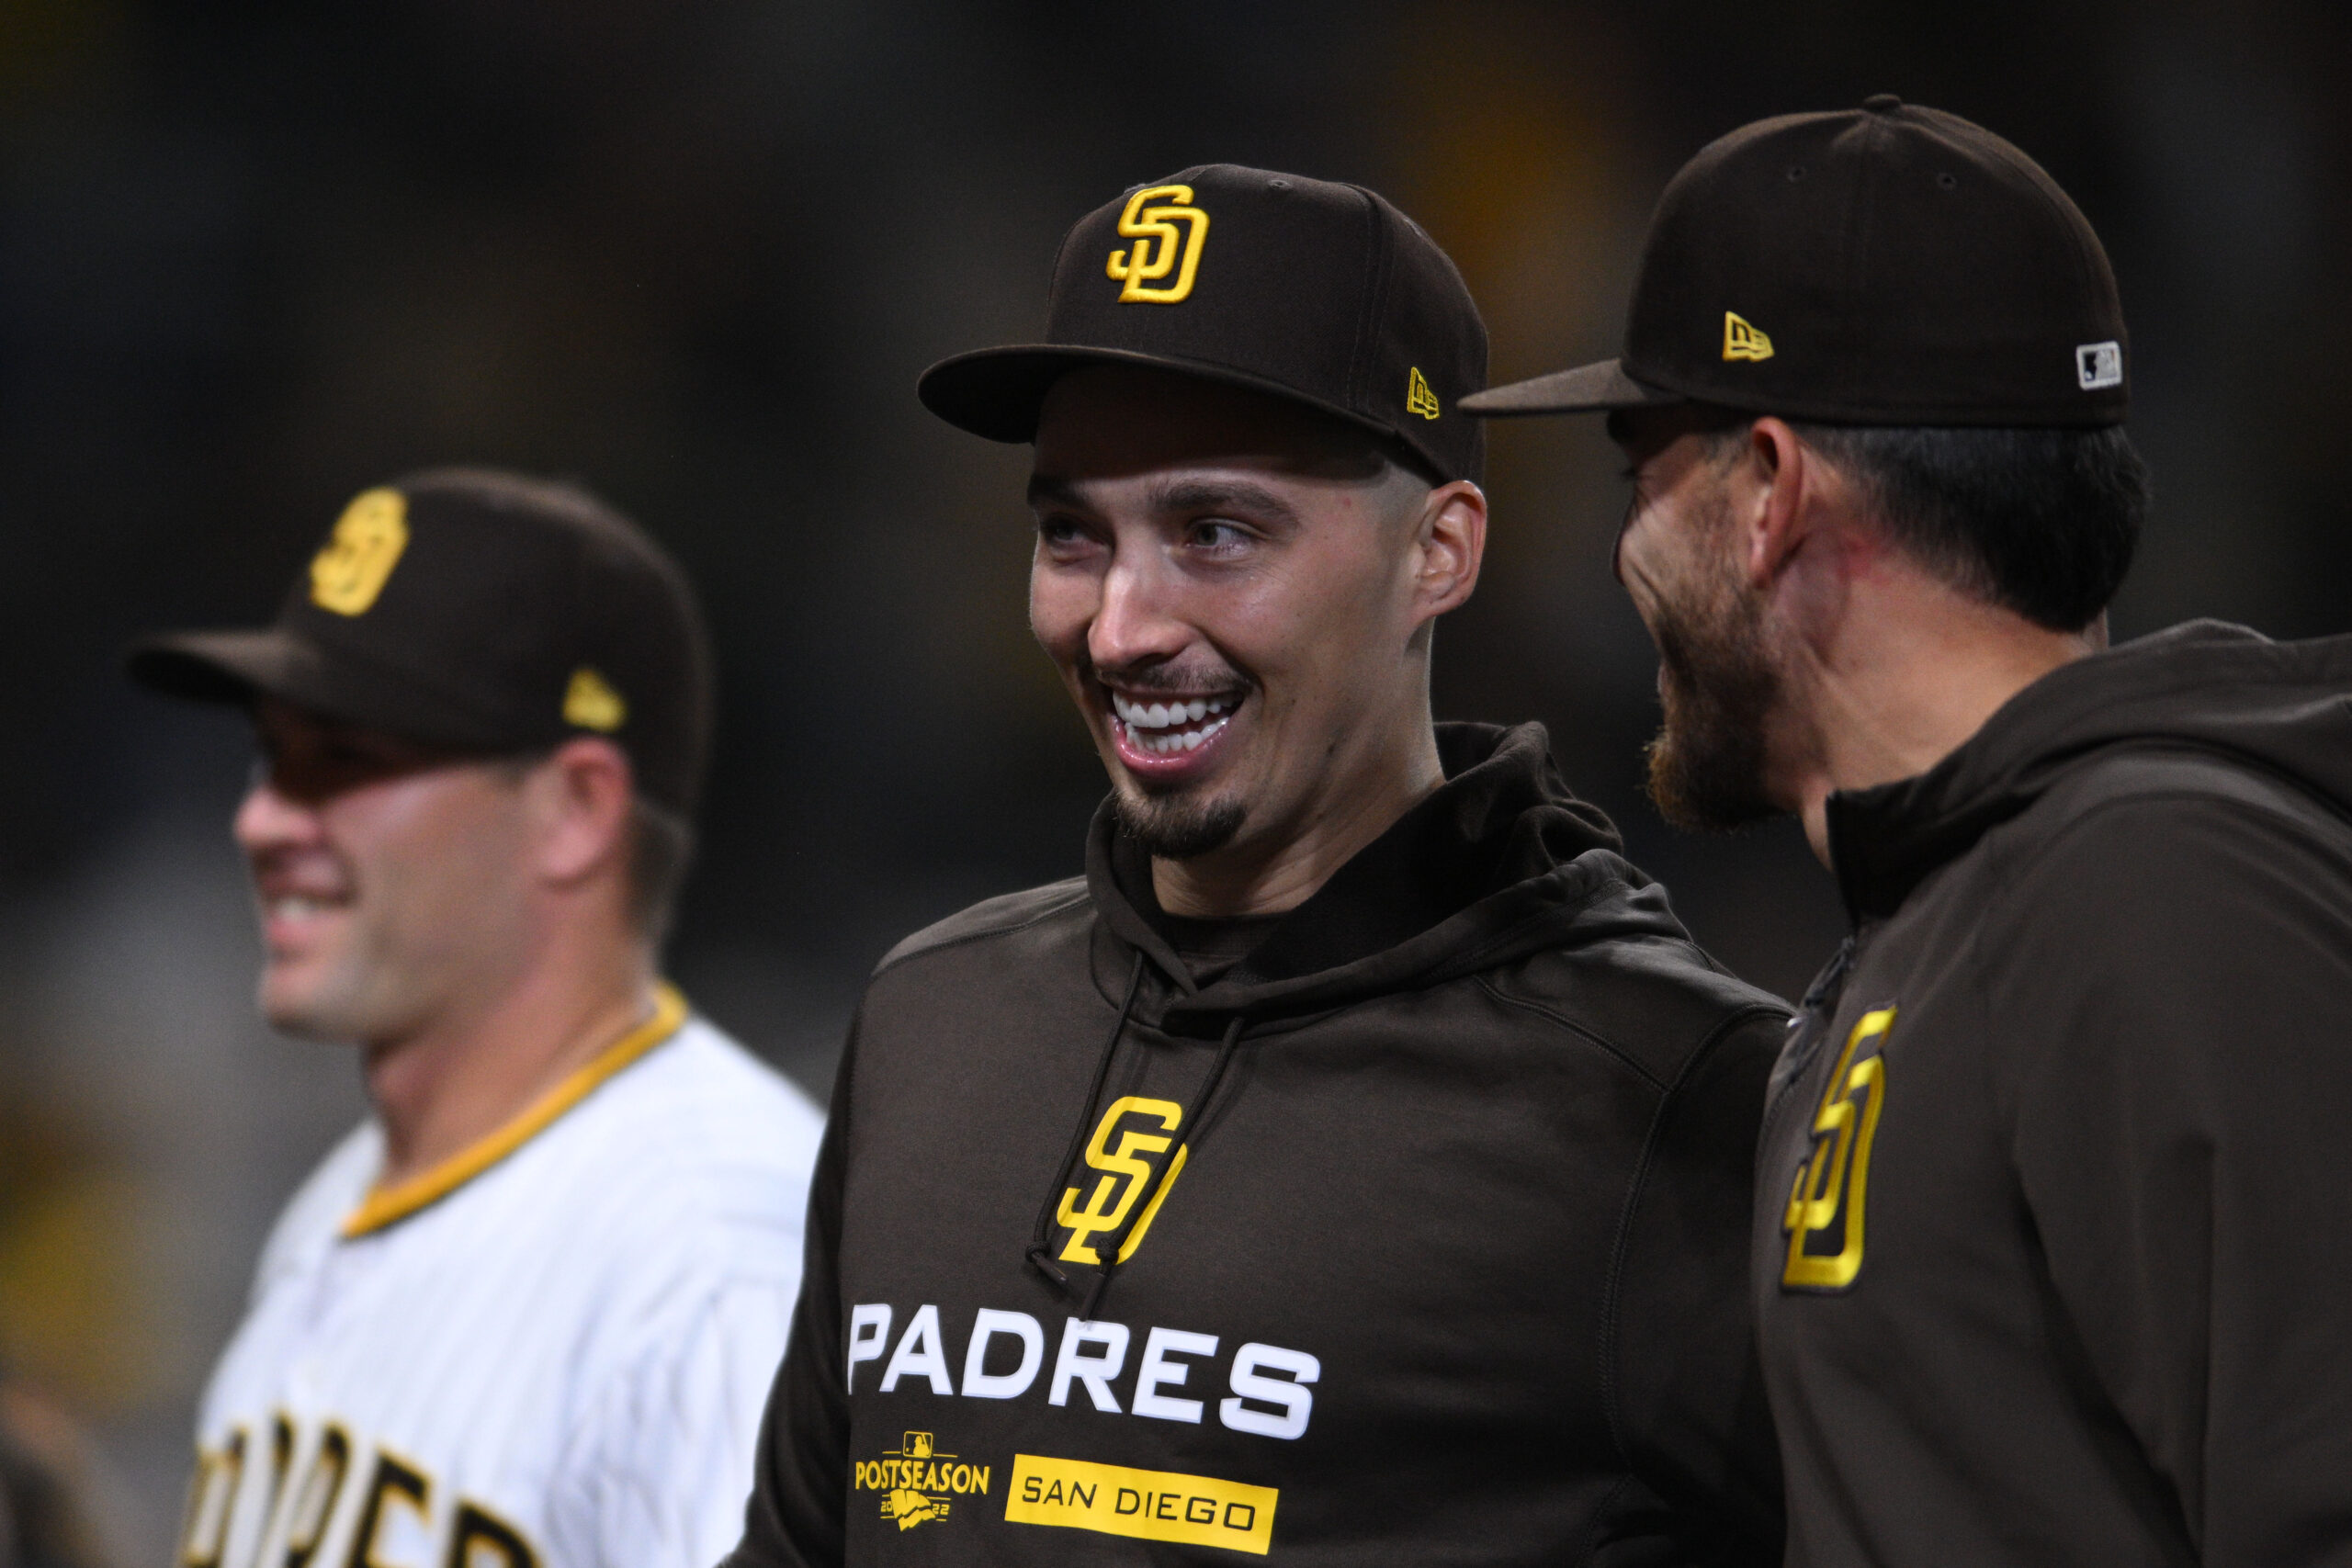 The 2023 season is a big year for Blake Snell